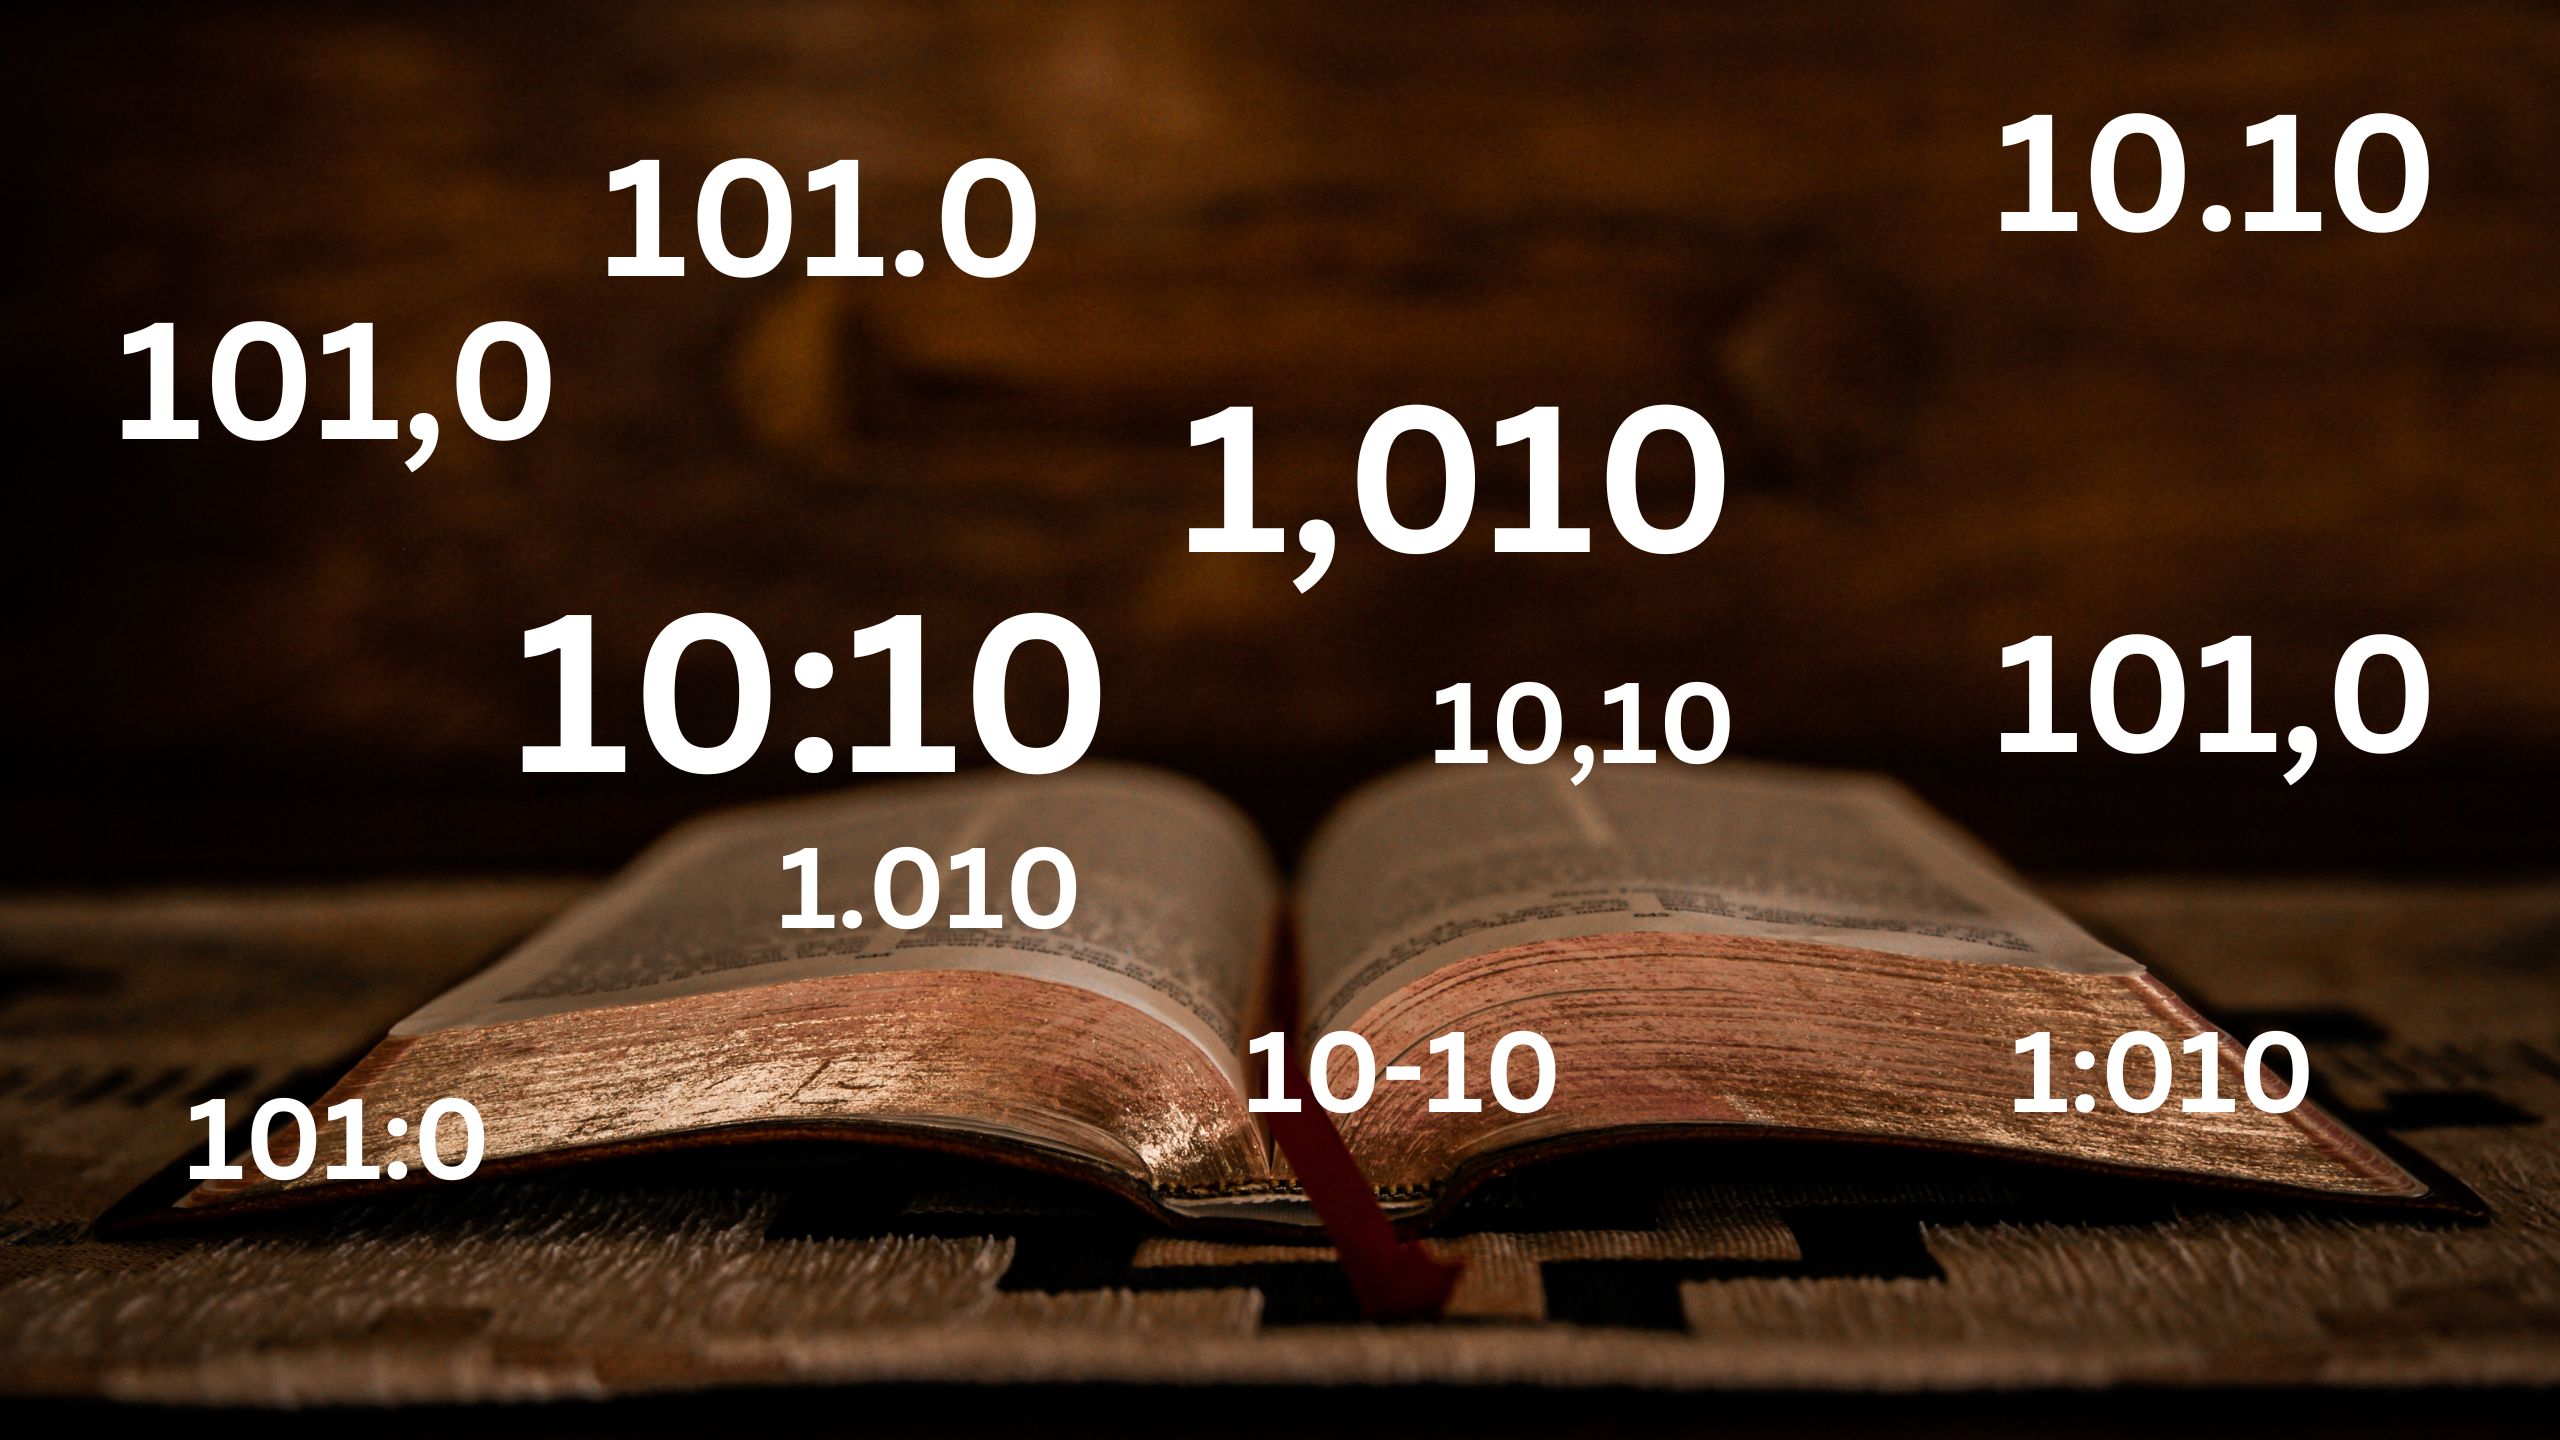 THE AMAZING MEANING OF 1010 IN THE BIBLE!